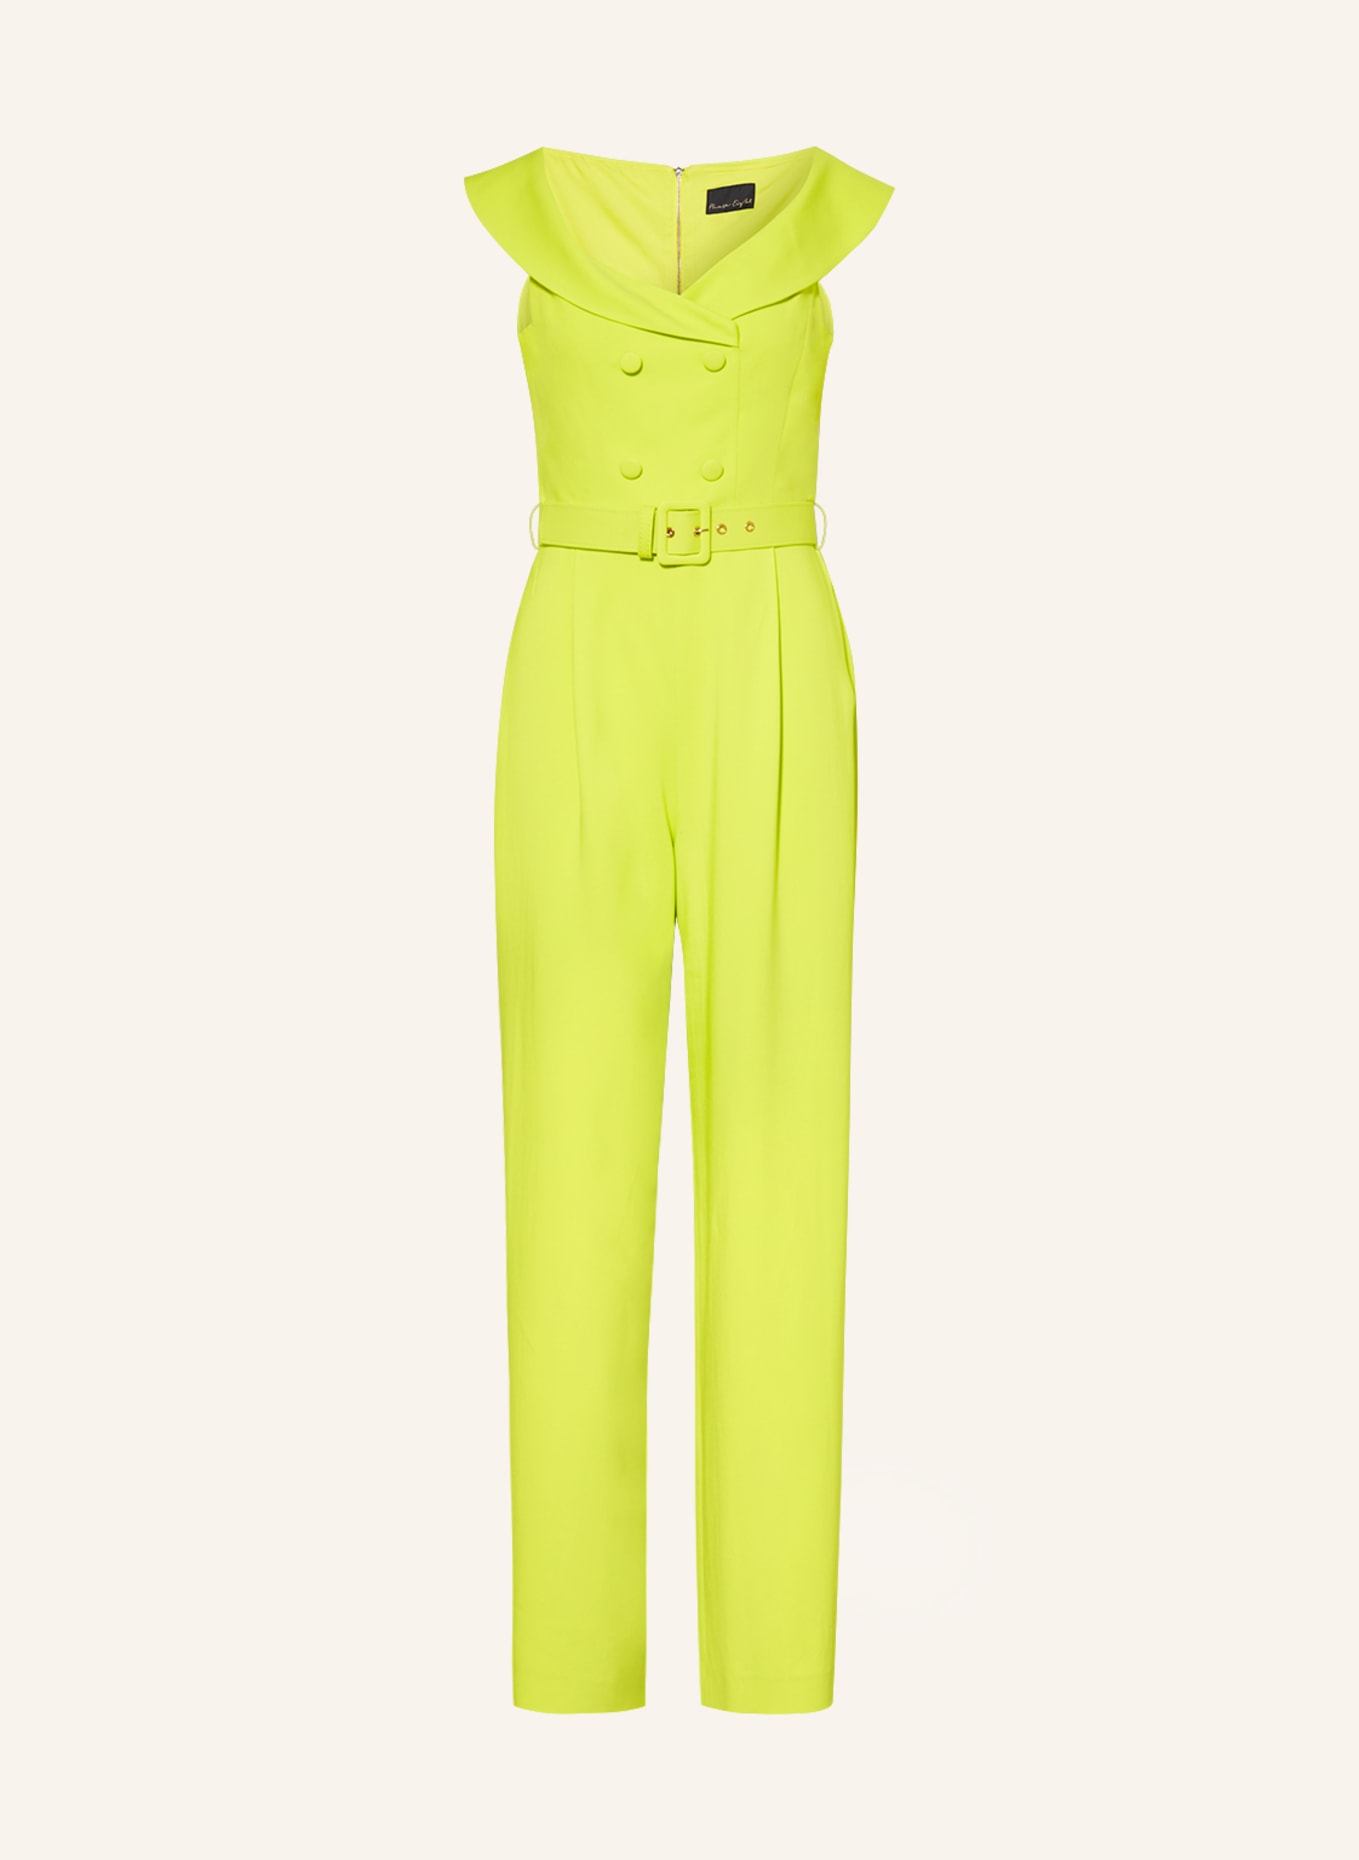 Solid Color Rayon Jumpsuit in Neon Green  TJW1096